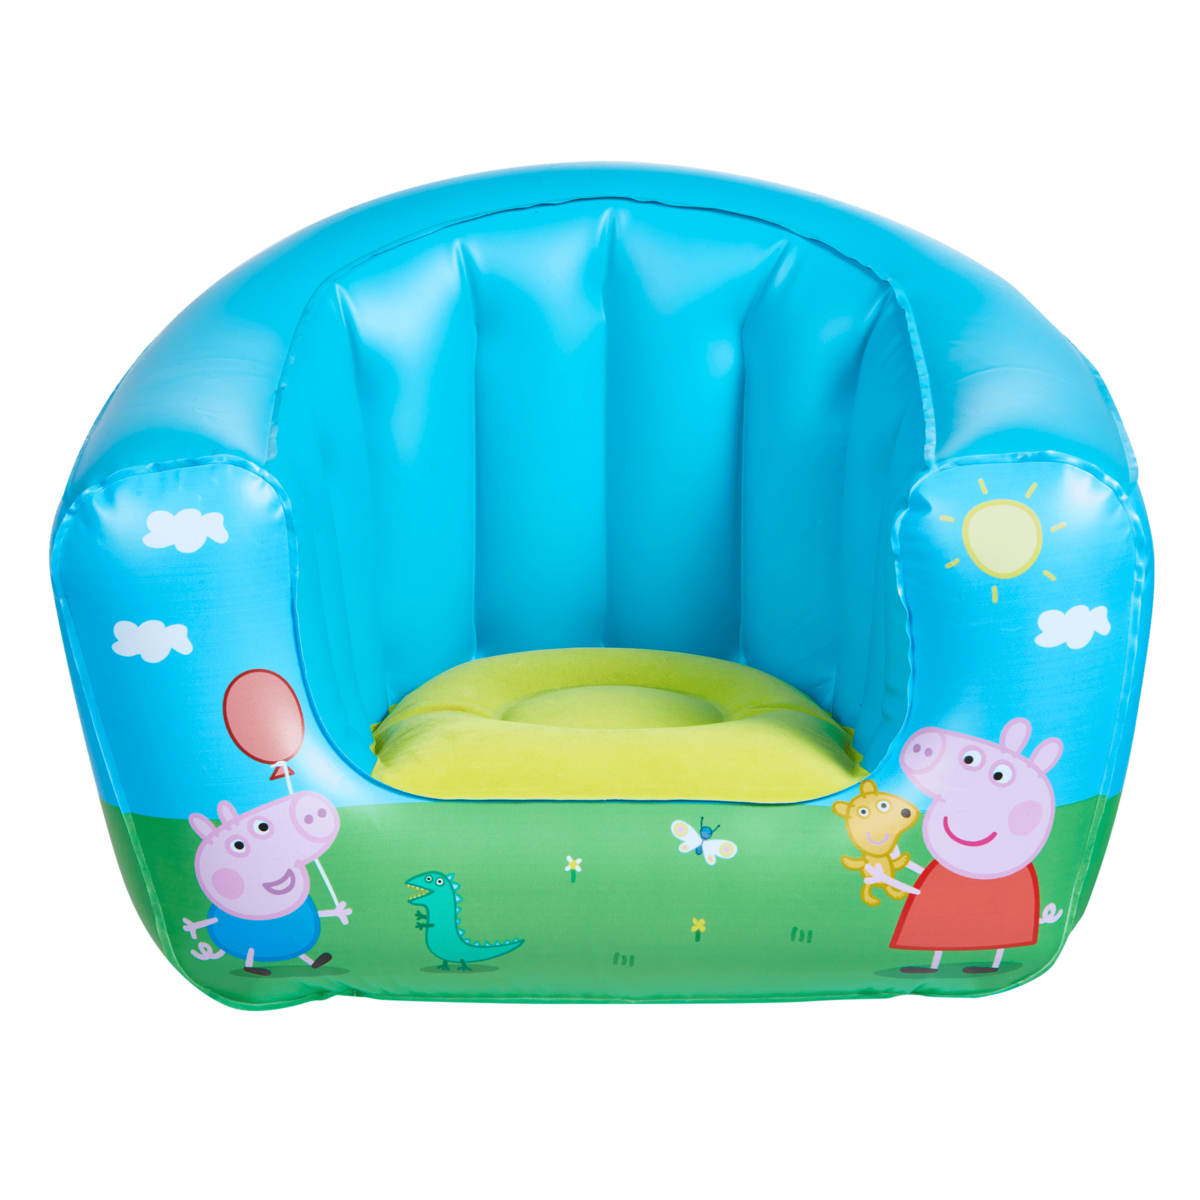 Ourbaby 32908 Peppa Pig